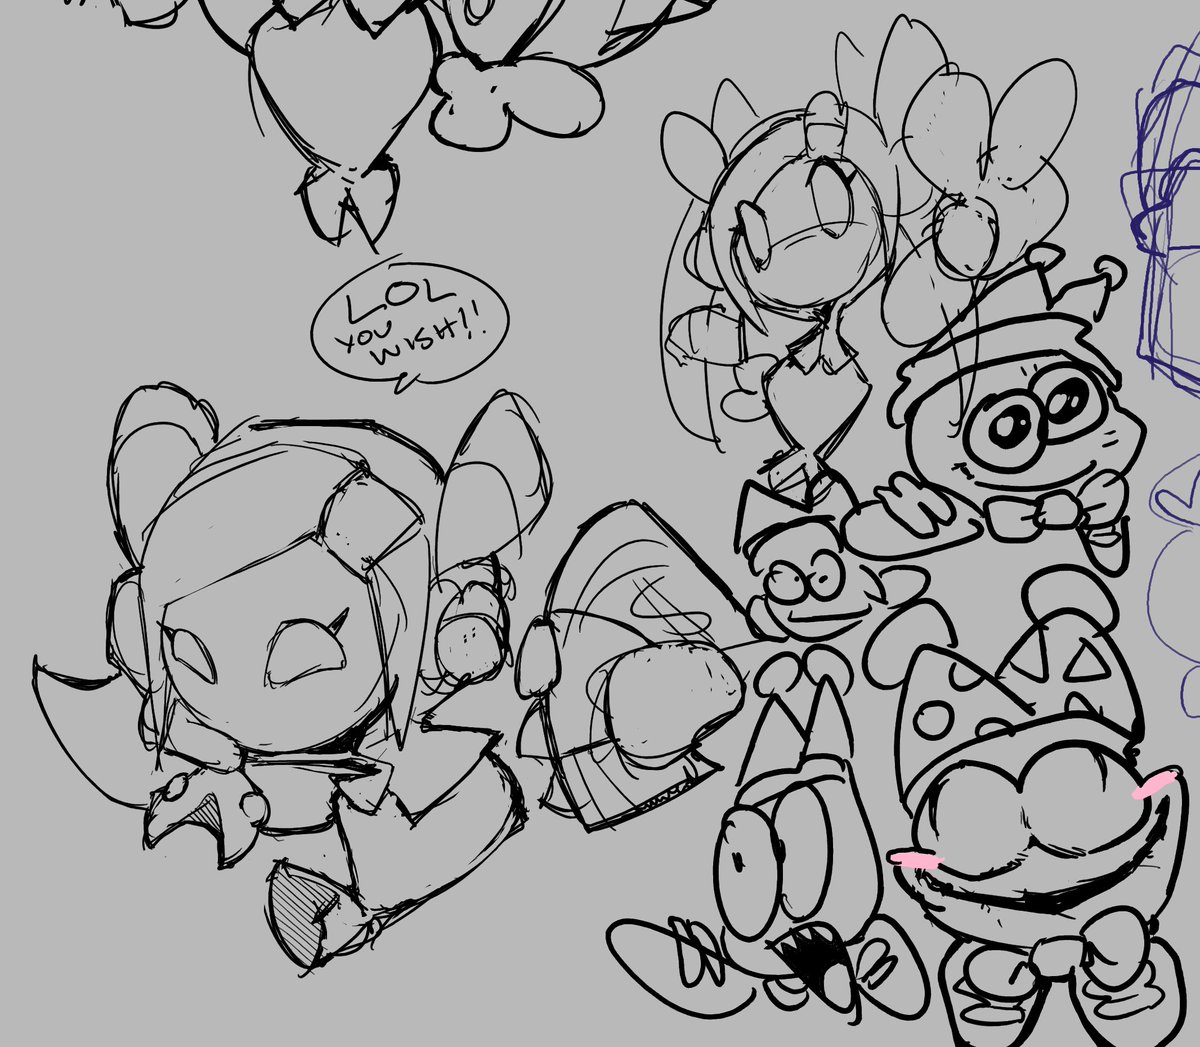 other drawpile warmups, i like susie a normal amount probably 